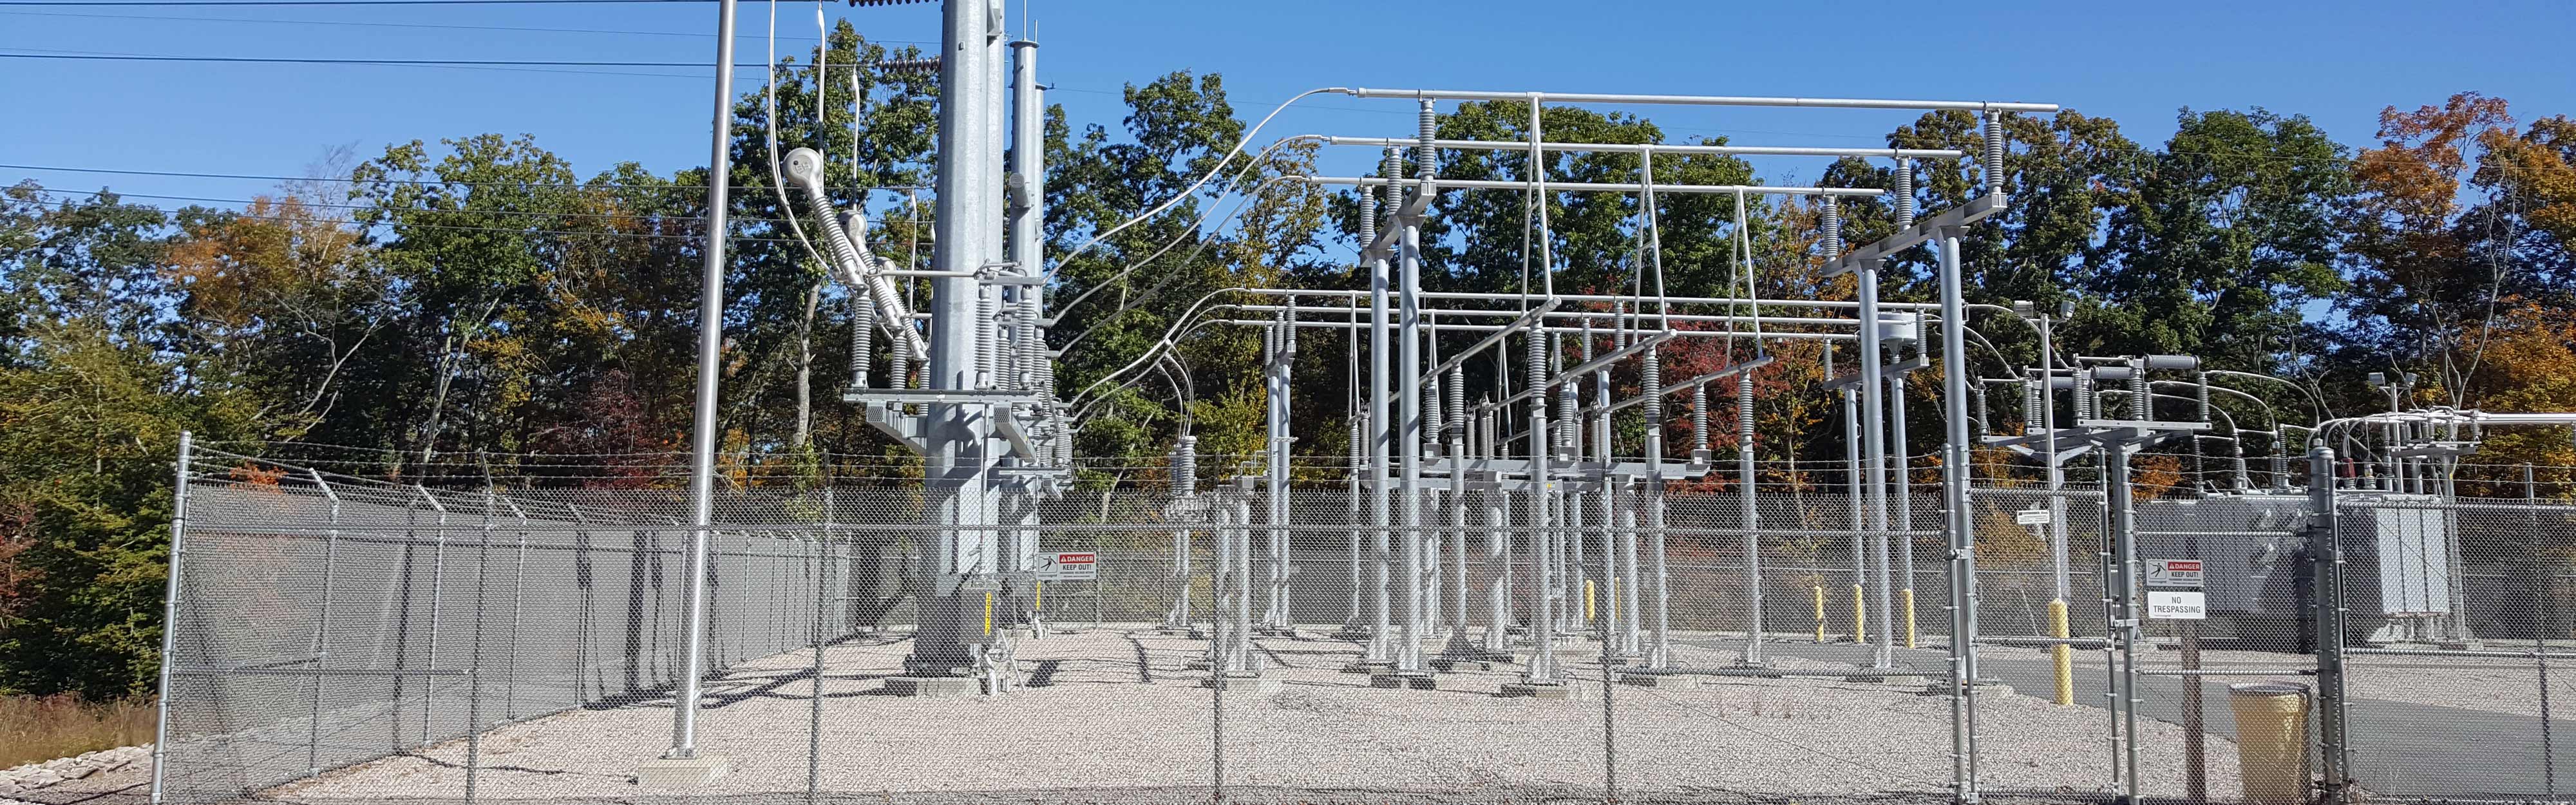 a typical suburban electric substation with lines and conduits